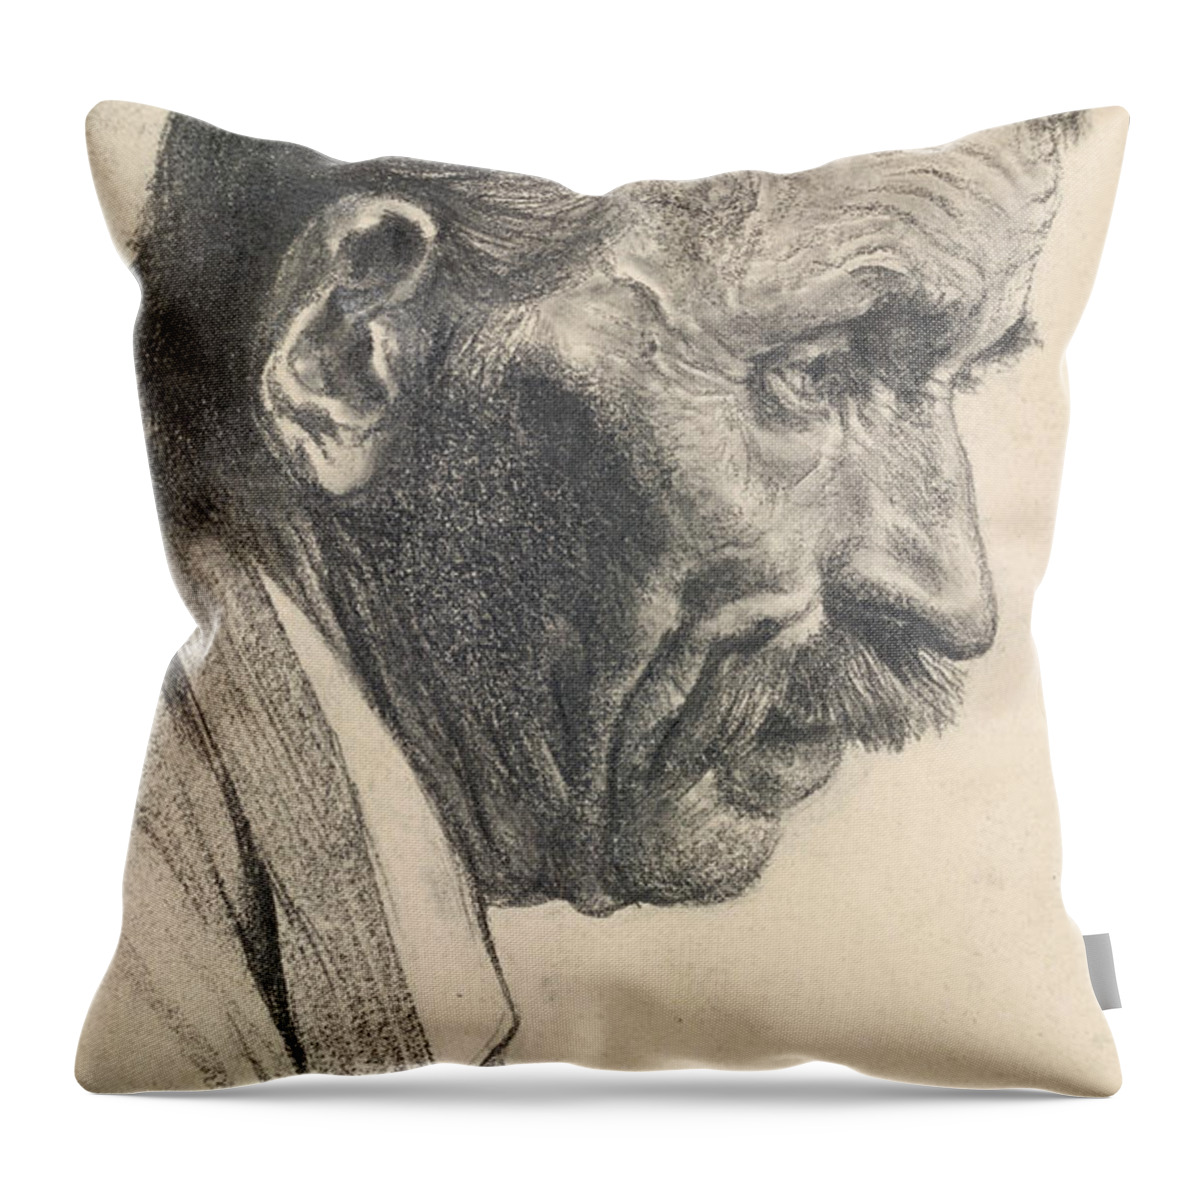 19th Century Art Throw Pillow featuring the drawing A Man's Head by Adolph Menzel